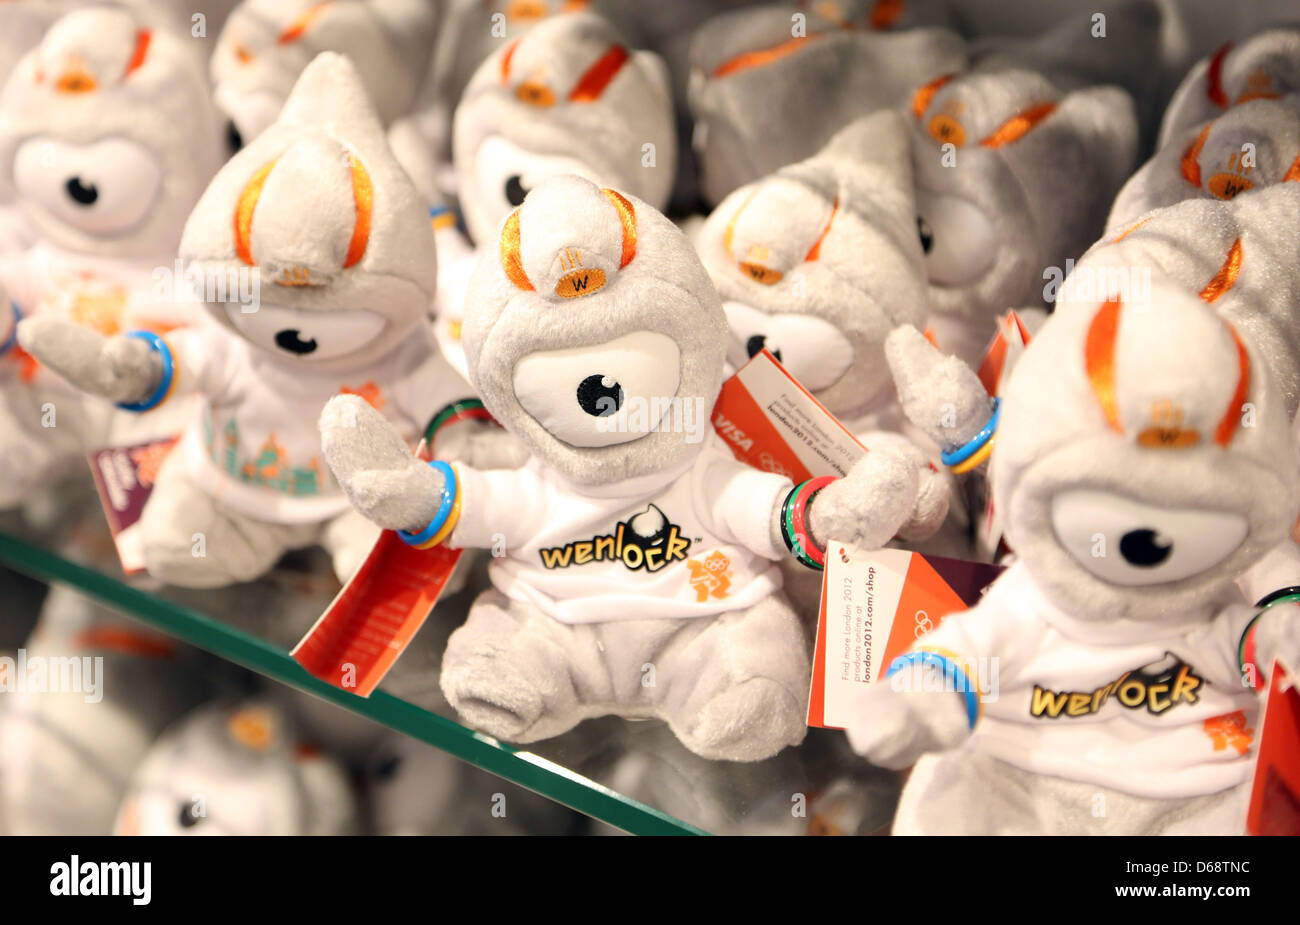 Official mascot Wenlock is offered in a shop in London, Great Britain, 21 July 2012. The London 2012 Olympic Games will start on 27 July 2012. Photo: Friso Gentsch dpa (zu dpa-KORR 'Verbotene Olympia-Werbung' vom 22.07.2012)  +++(c) dpa - Bildfunk+++ Stock Photo